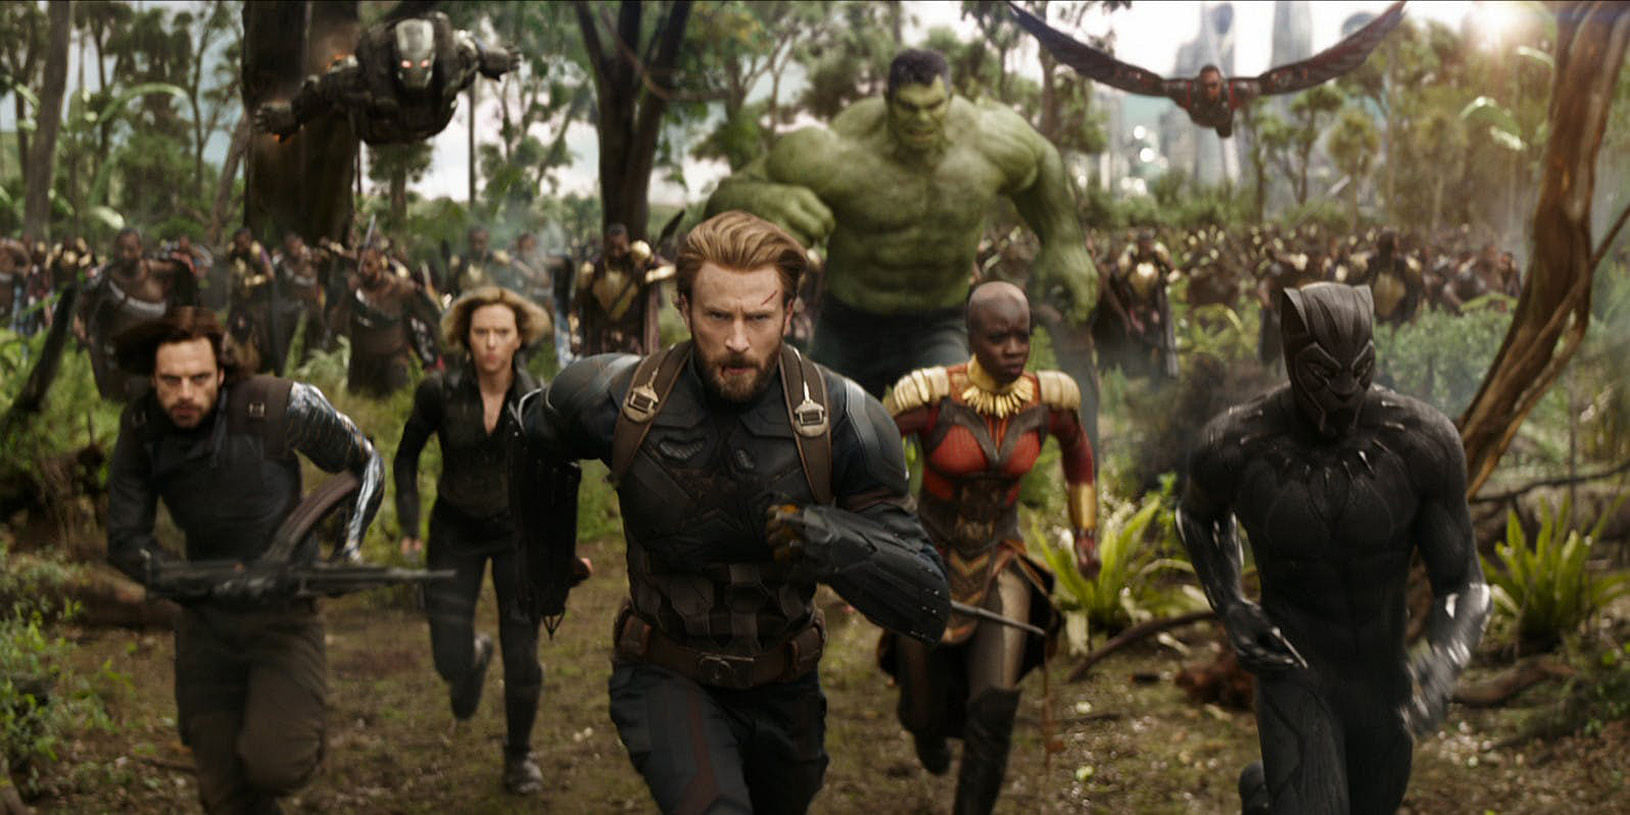 ‘Avengers: Infinity War’, though lacking in inventiveness, is running to packed houses.